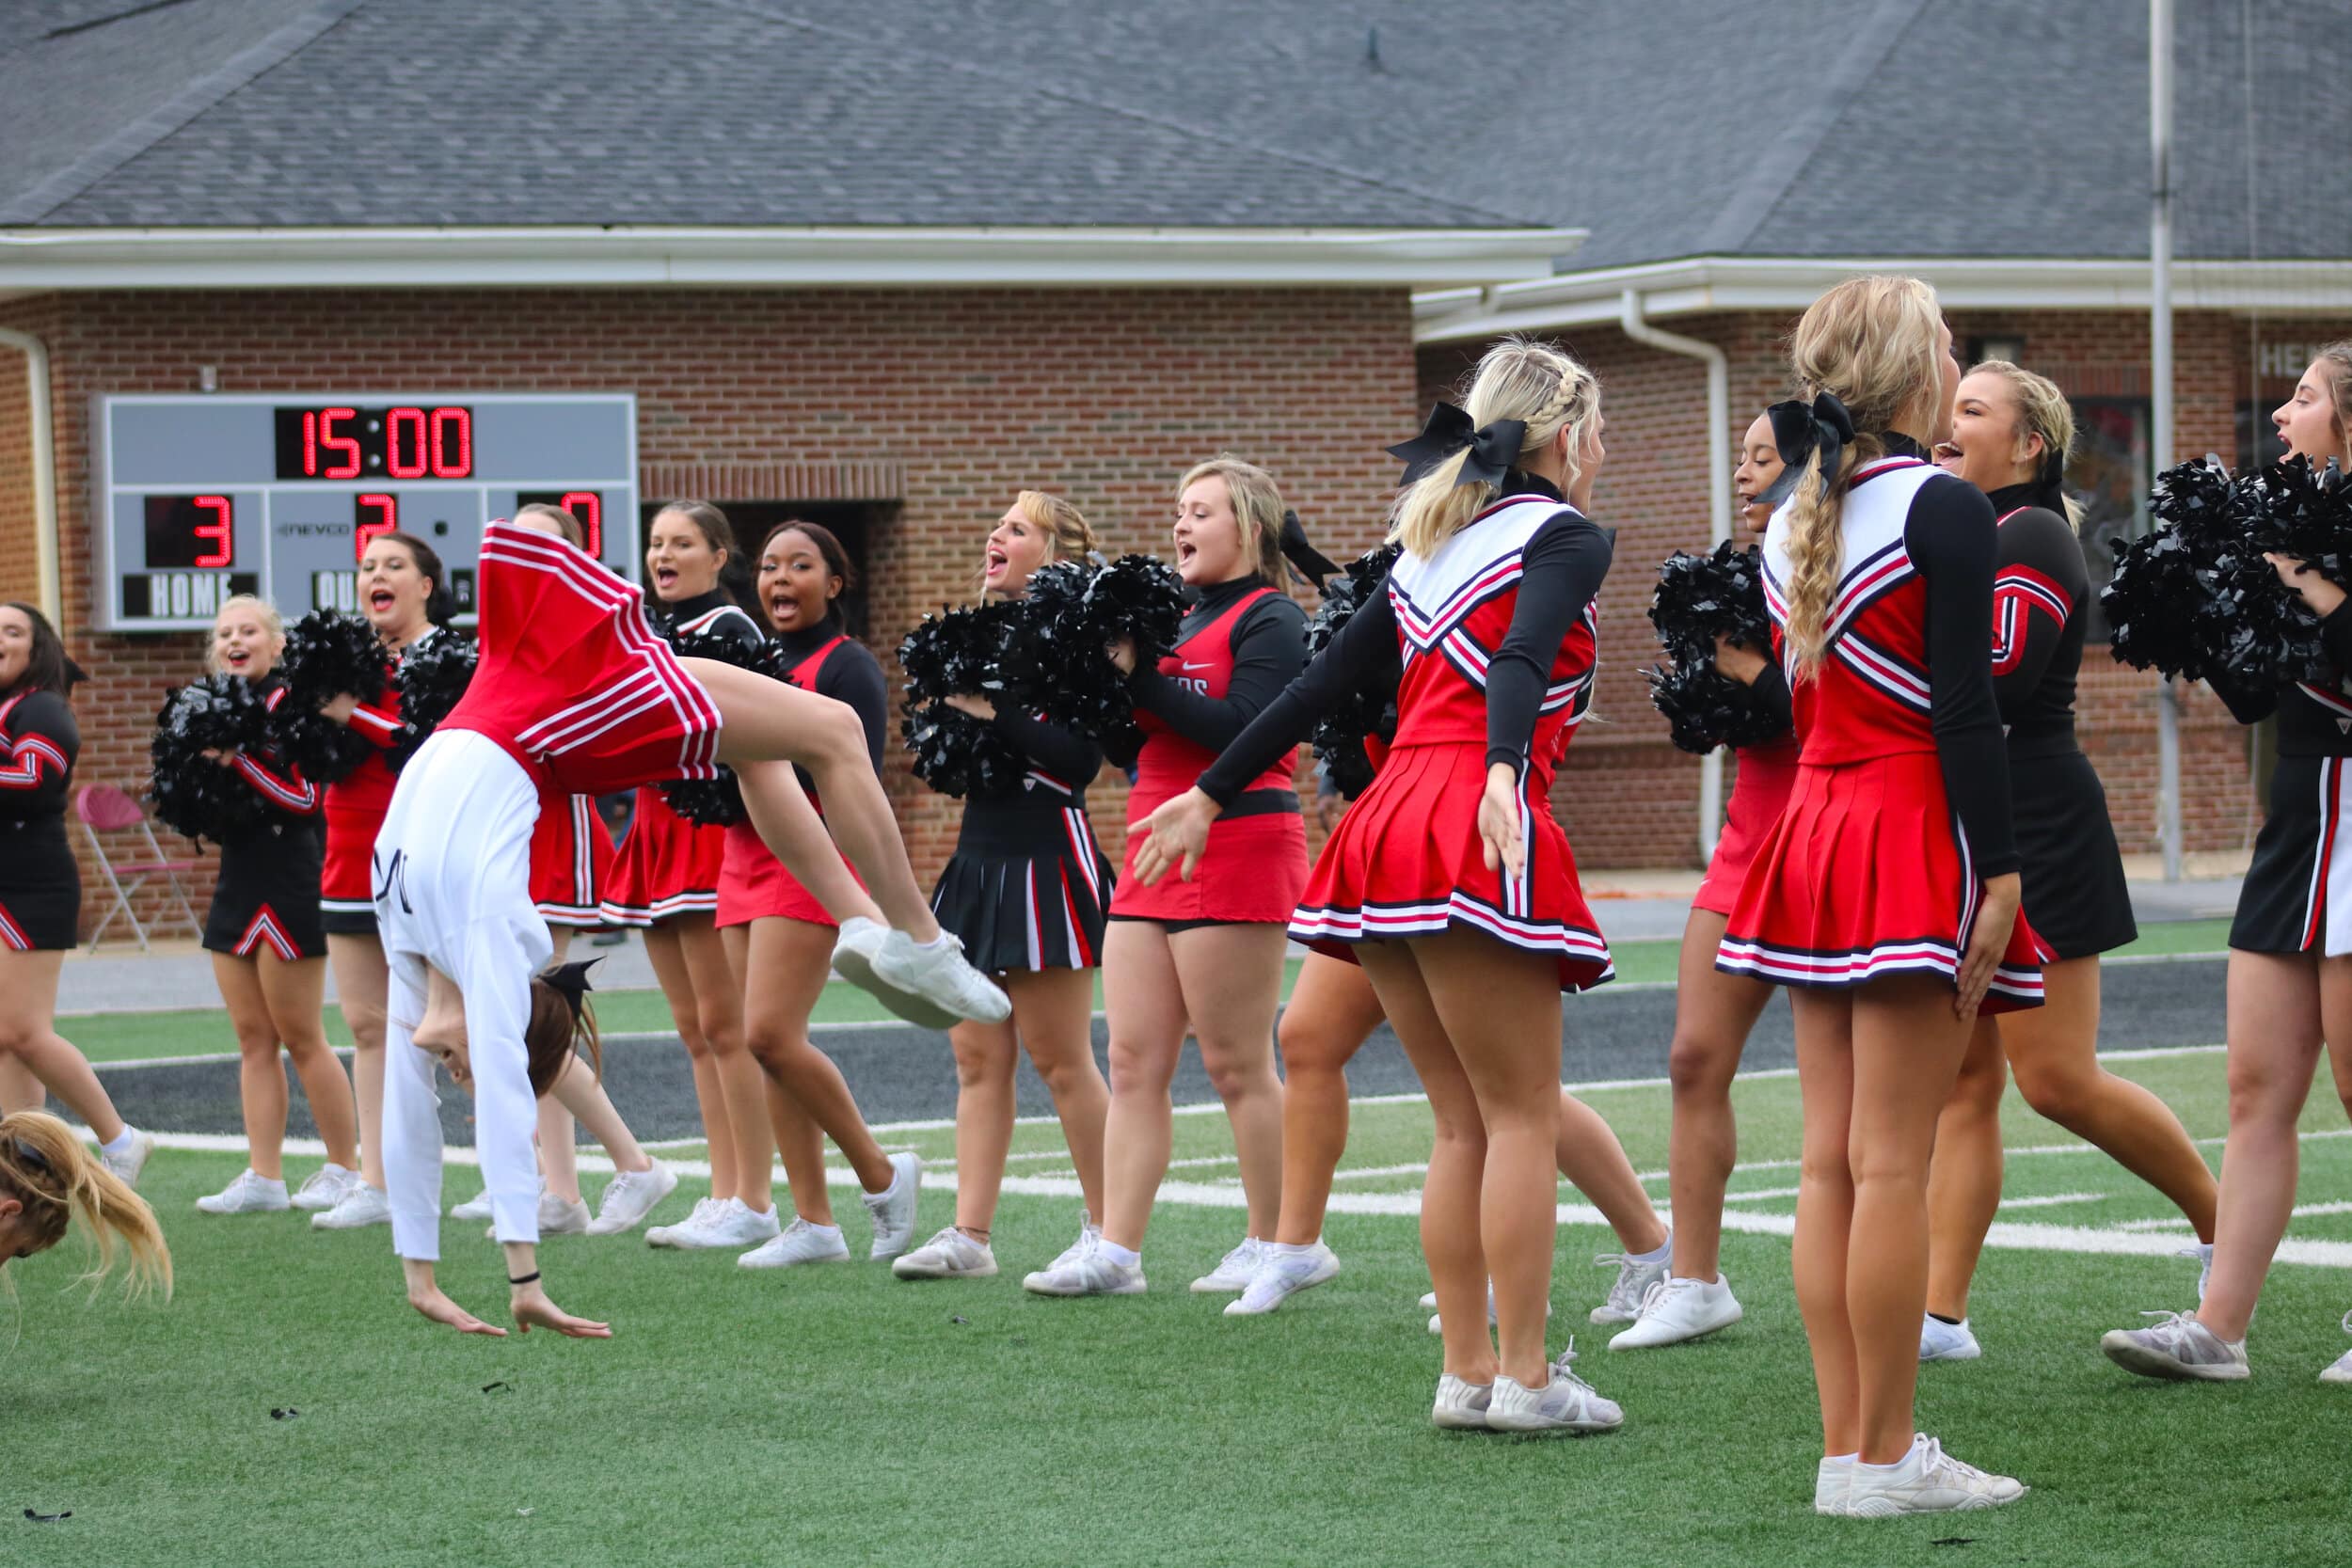 The NGU Cheerleaders do a cheer as they wear their current and previous cheerleading outfits from previous years, including when NGU was NGC (North Greenville College).